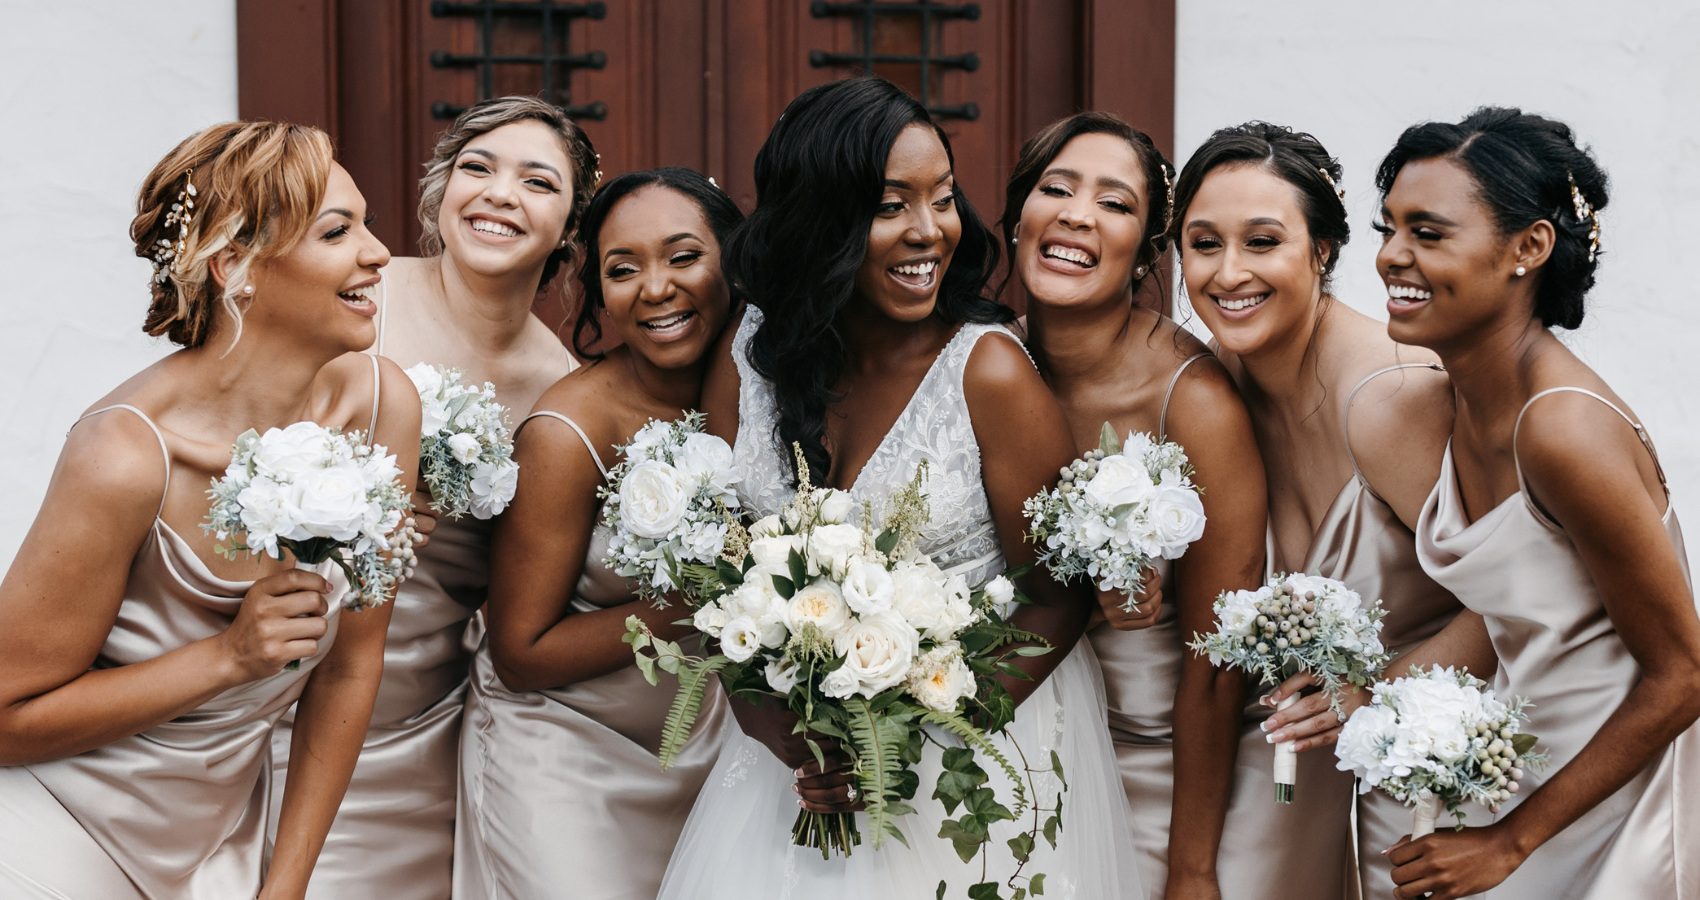 Black Bride In A-Line Wedding Dress Called Raelynne By Rebecca Ingram With Bridesmaids For Stress Free Wedding Planning